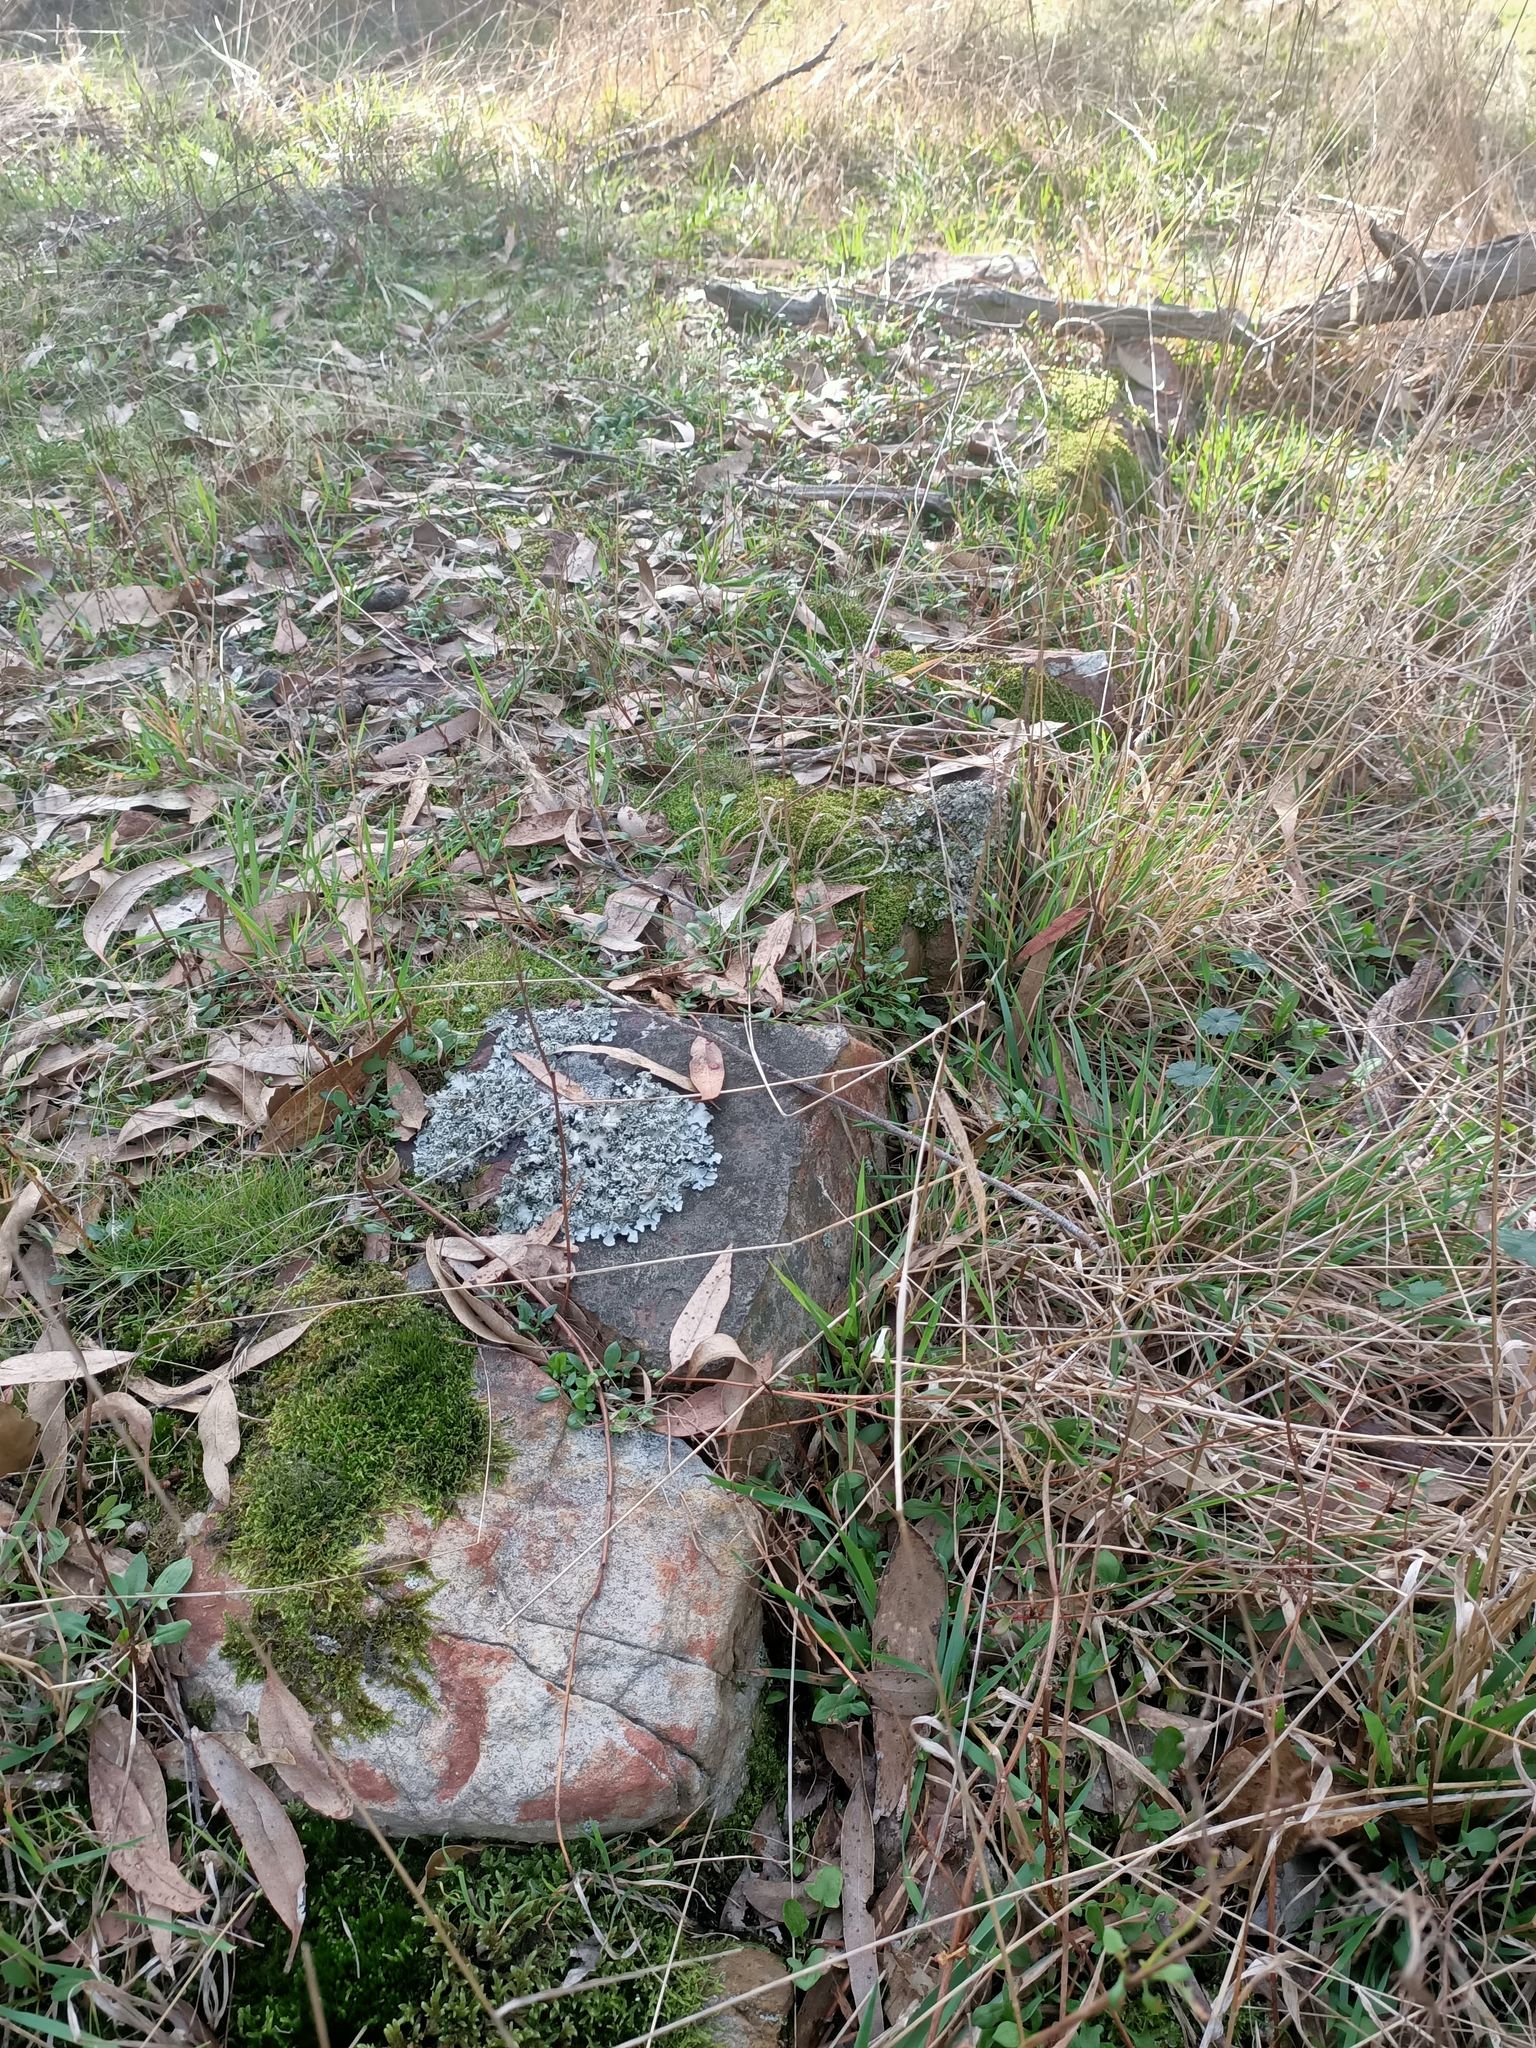 The remains of a garden edge made from stones